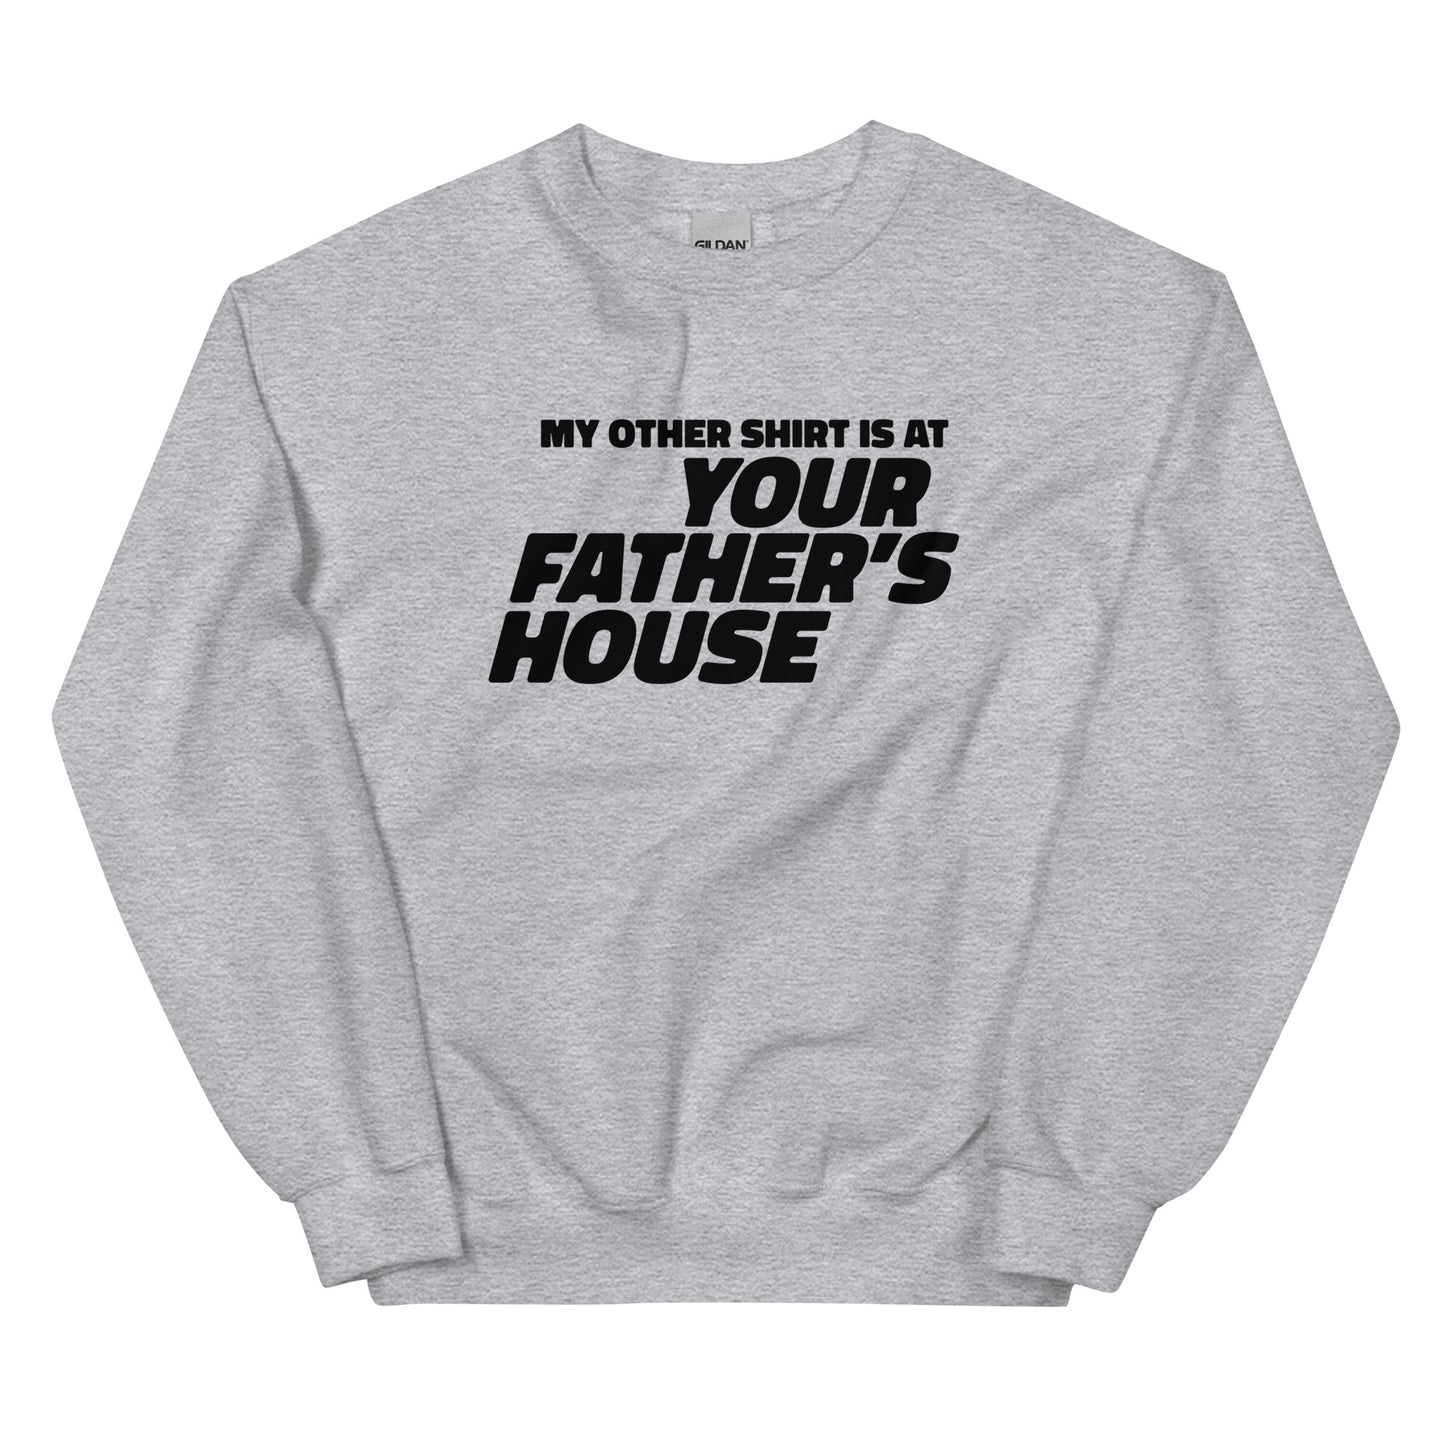 My Other Shirt is at Your Father's House Unisex Sweatshirt